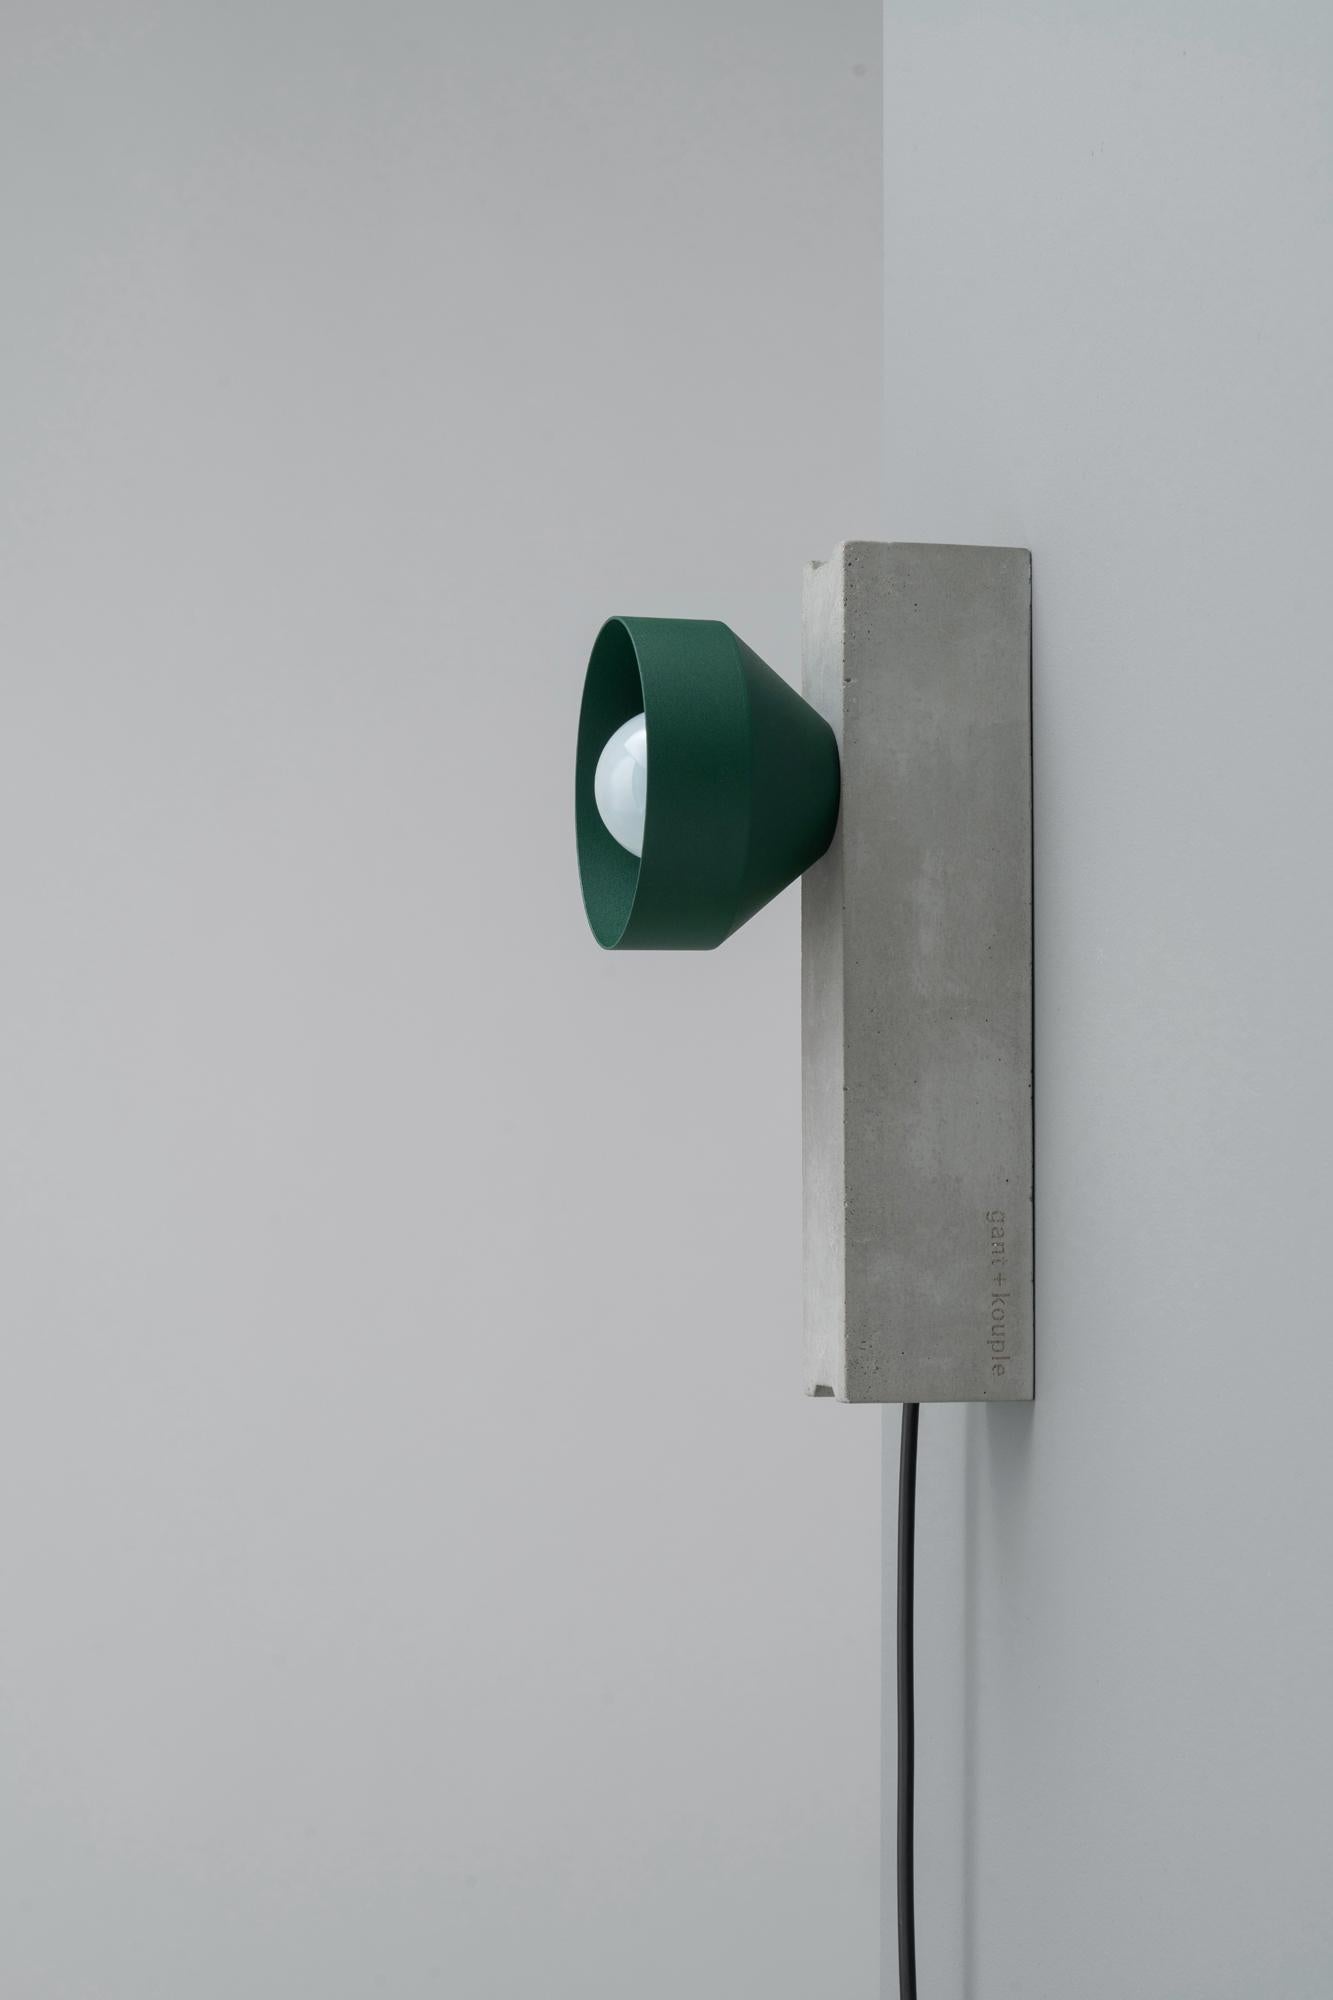 Forest Block Wall Lamp by +kouple
Dimensions: D 26 x W 10 x H 12,7 cm.
Materials: Concrete, powder-coated steel and textile. 

Available in different color options. Please contact us.

All our lamps can be wired according to each country. If sold to